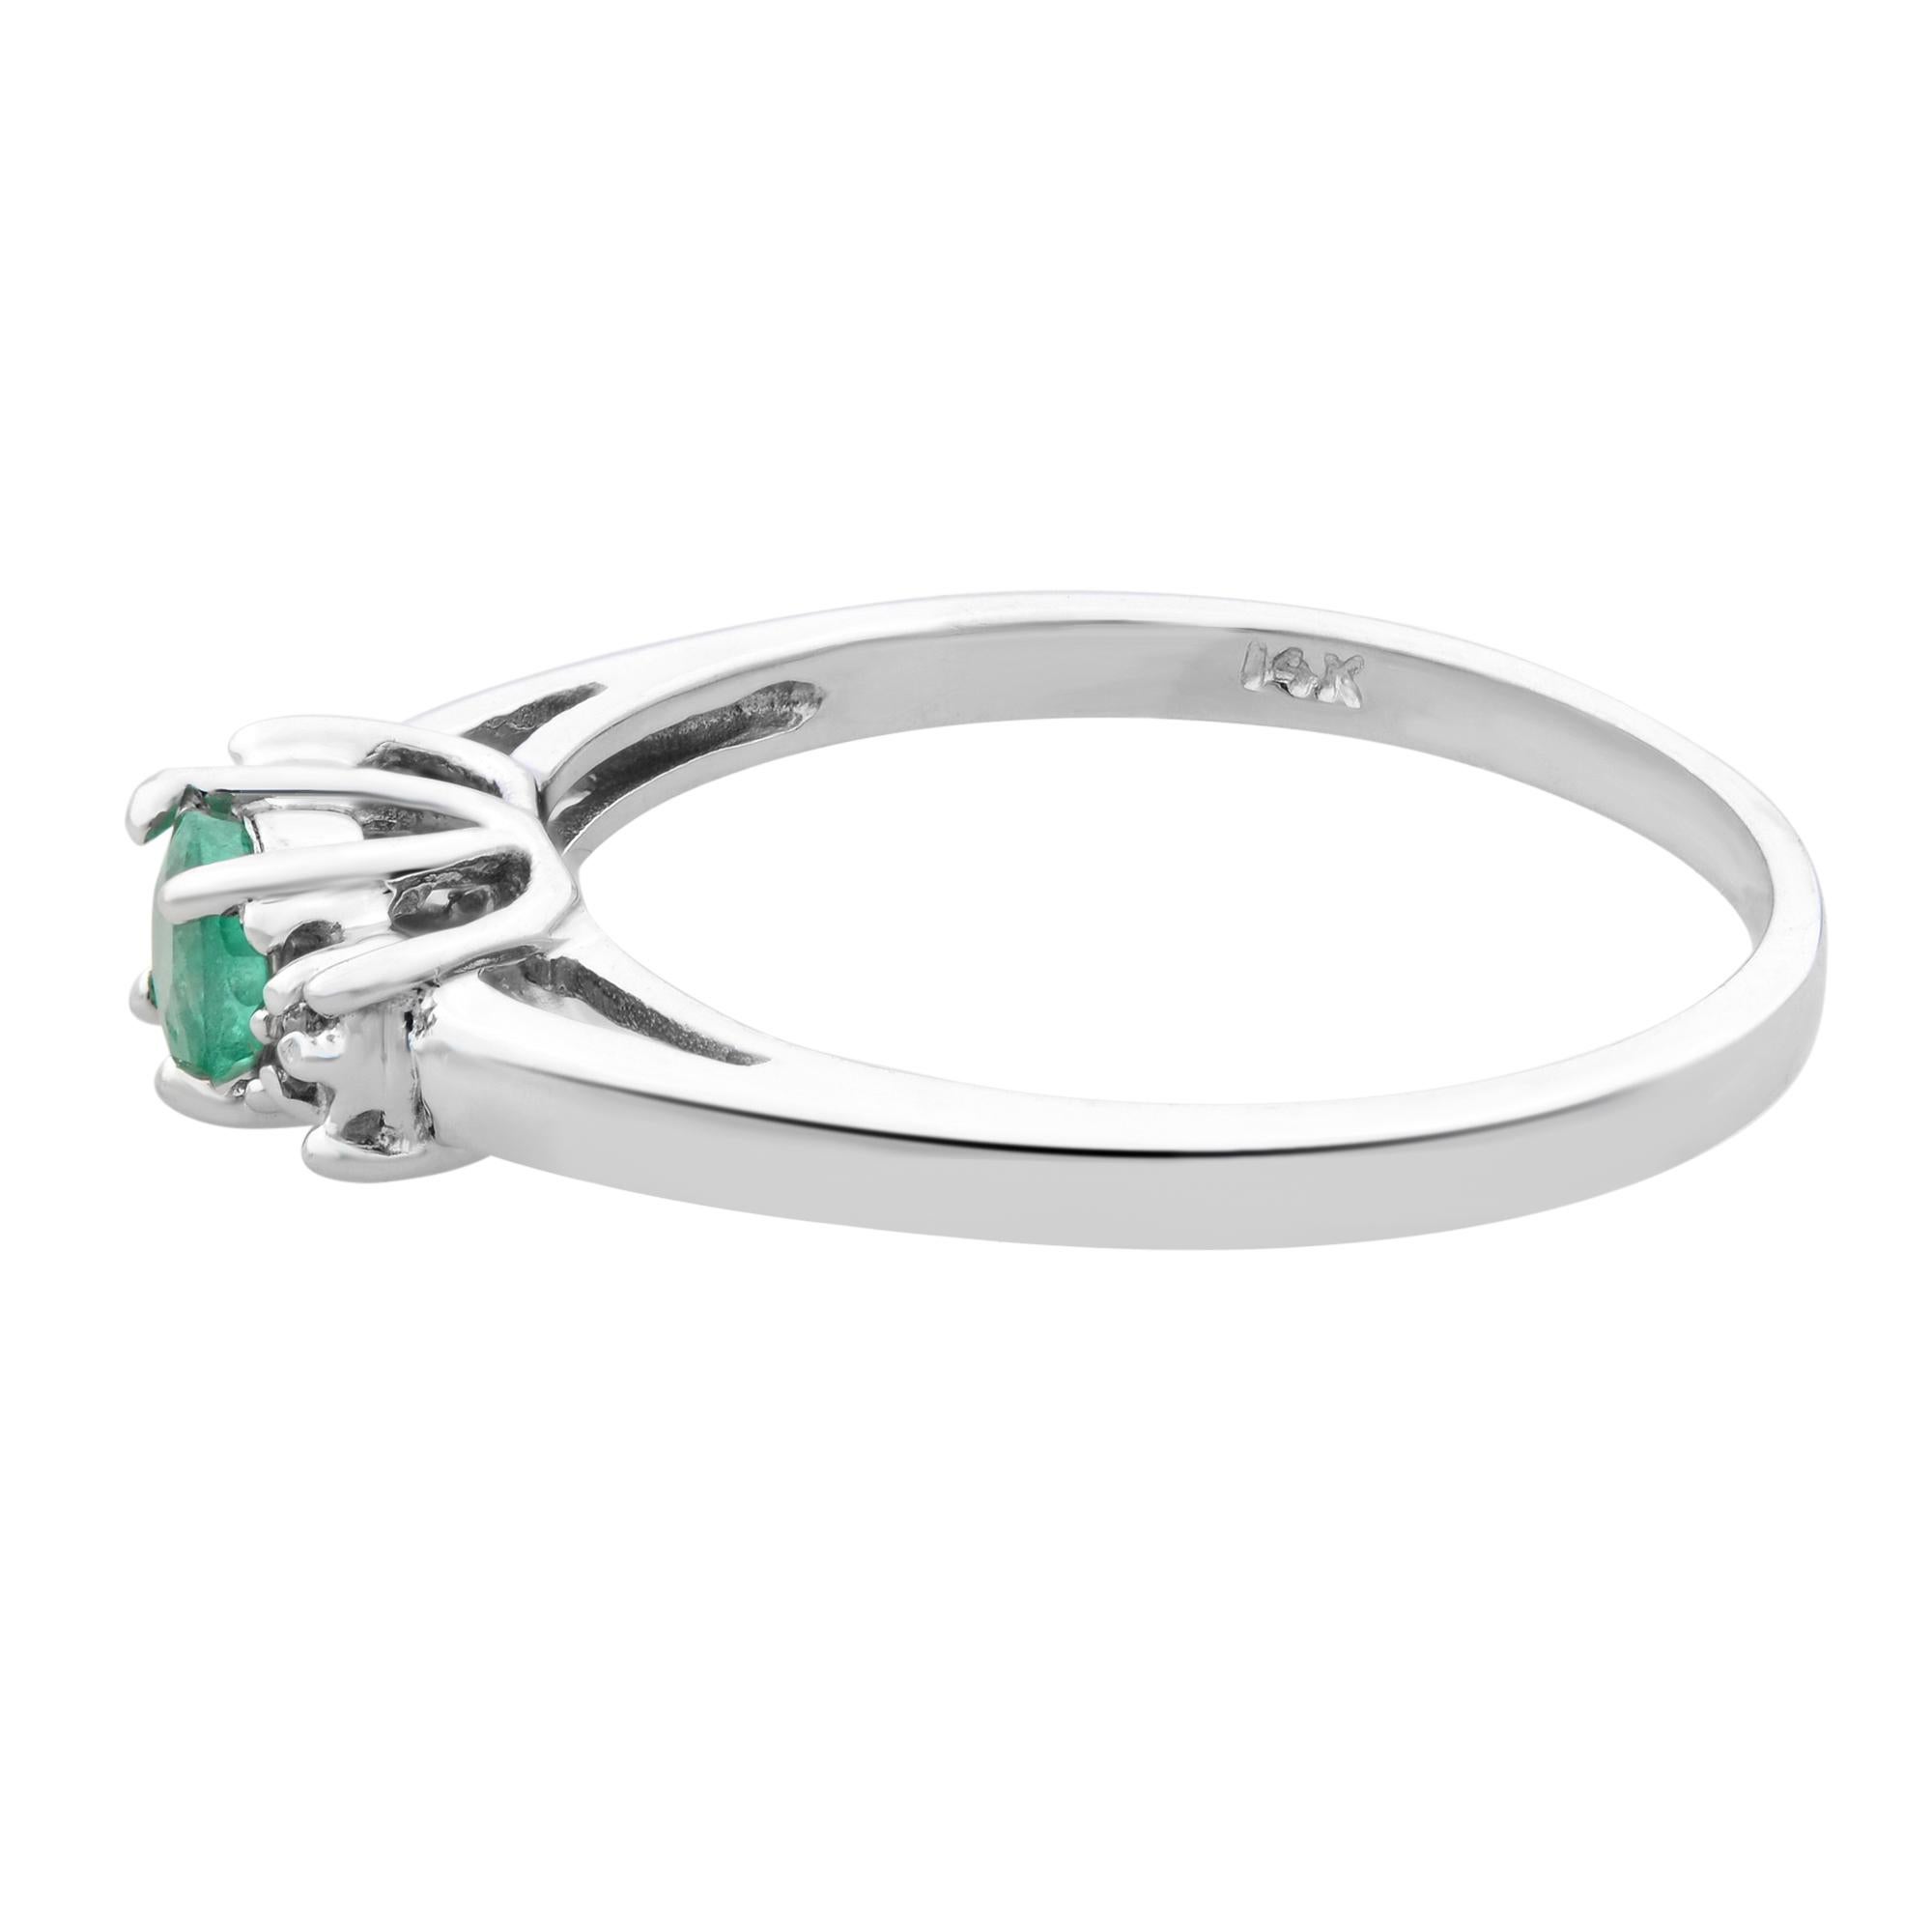 This beautiful ladies cocktail ring is unworn and comes with manufacturers box and booklet. Made with 14K White gold, it features a 0.25cttw round cut emerald and accented with diamonds of 0.02cttw, all gemstones set with prongs.